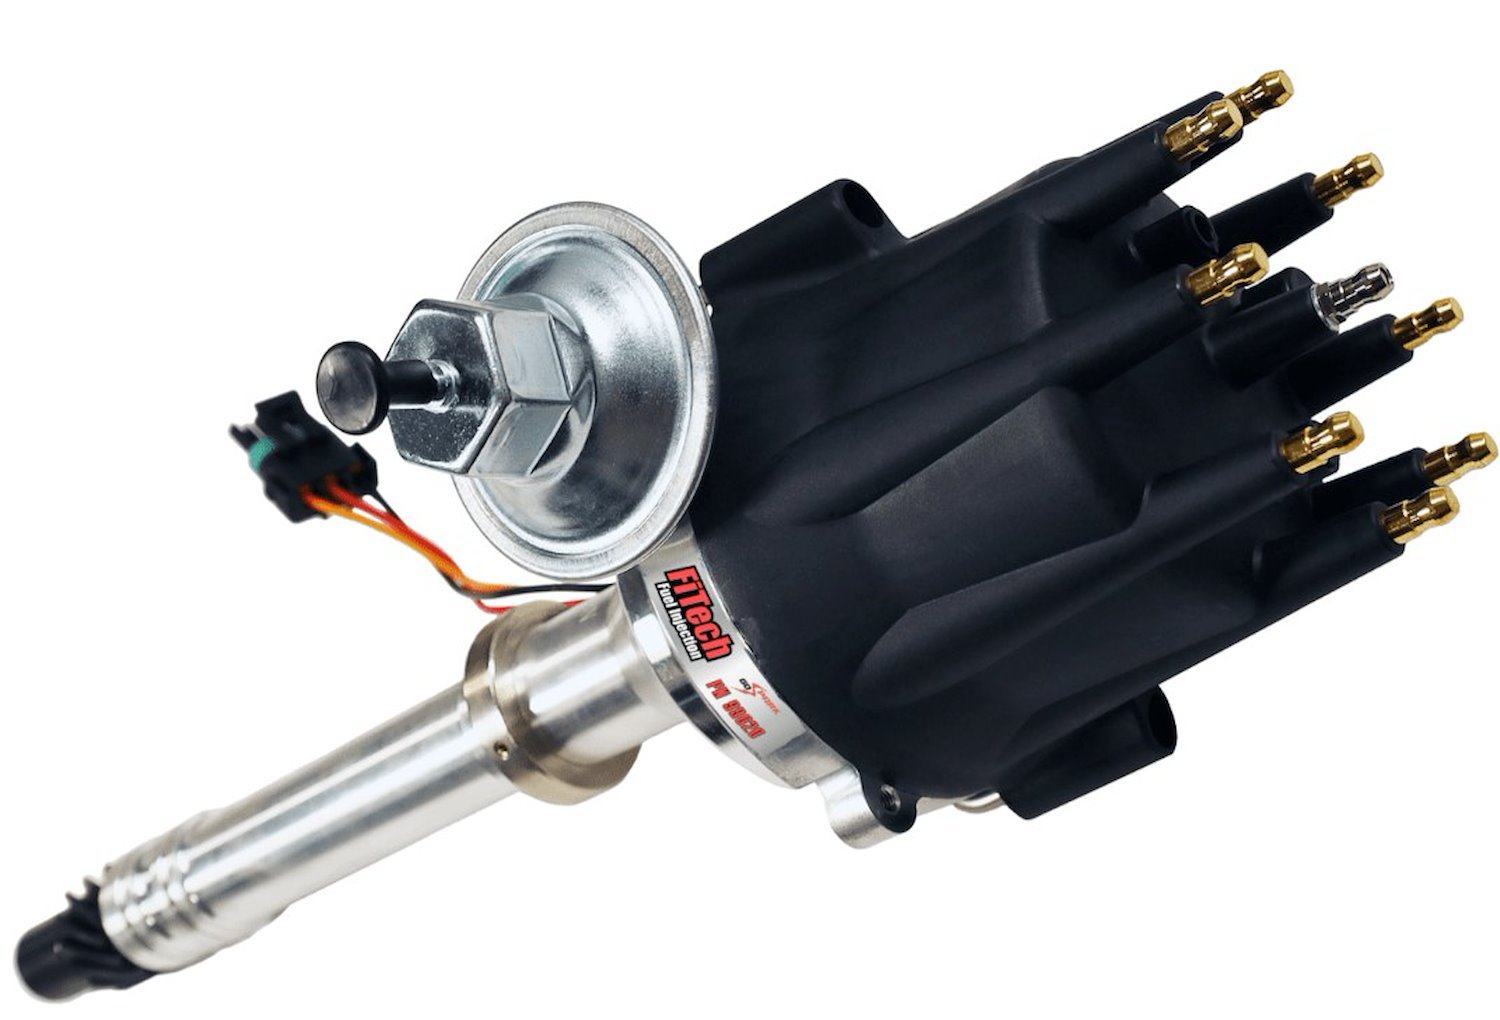 99020 Go Spark Ready-To-Run Distributor for Small Block and Big Block Chevy [With Slip Collar]